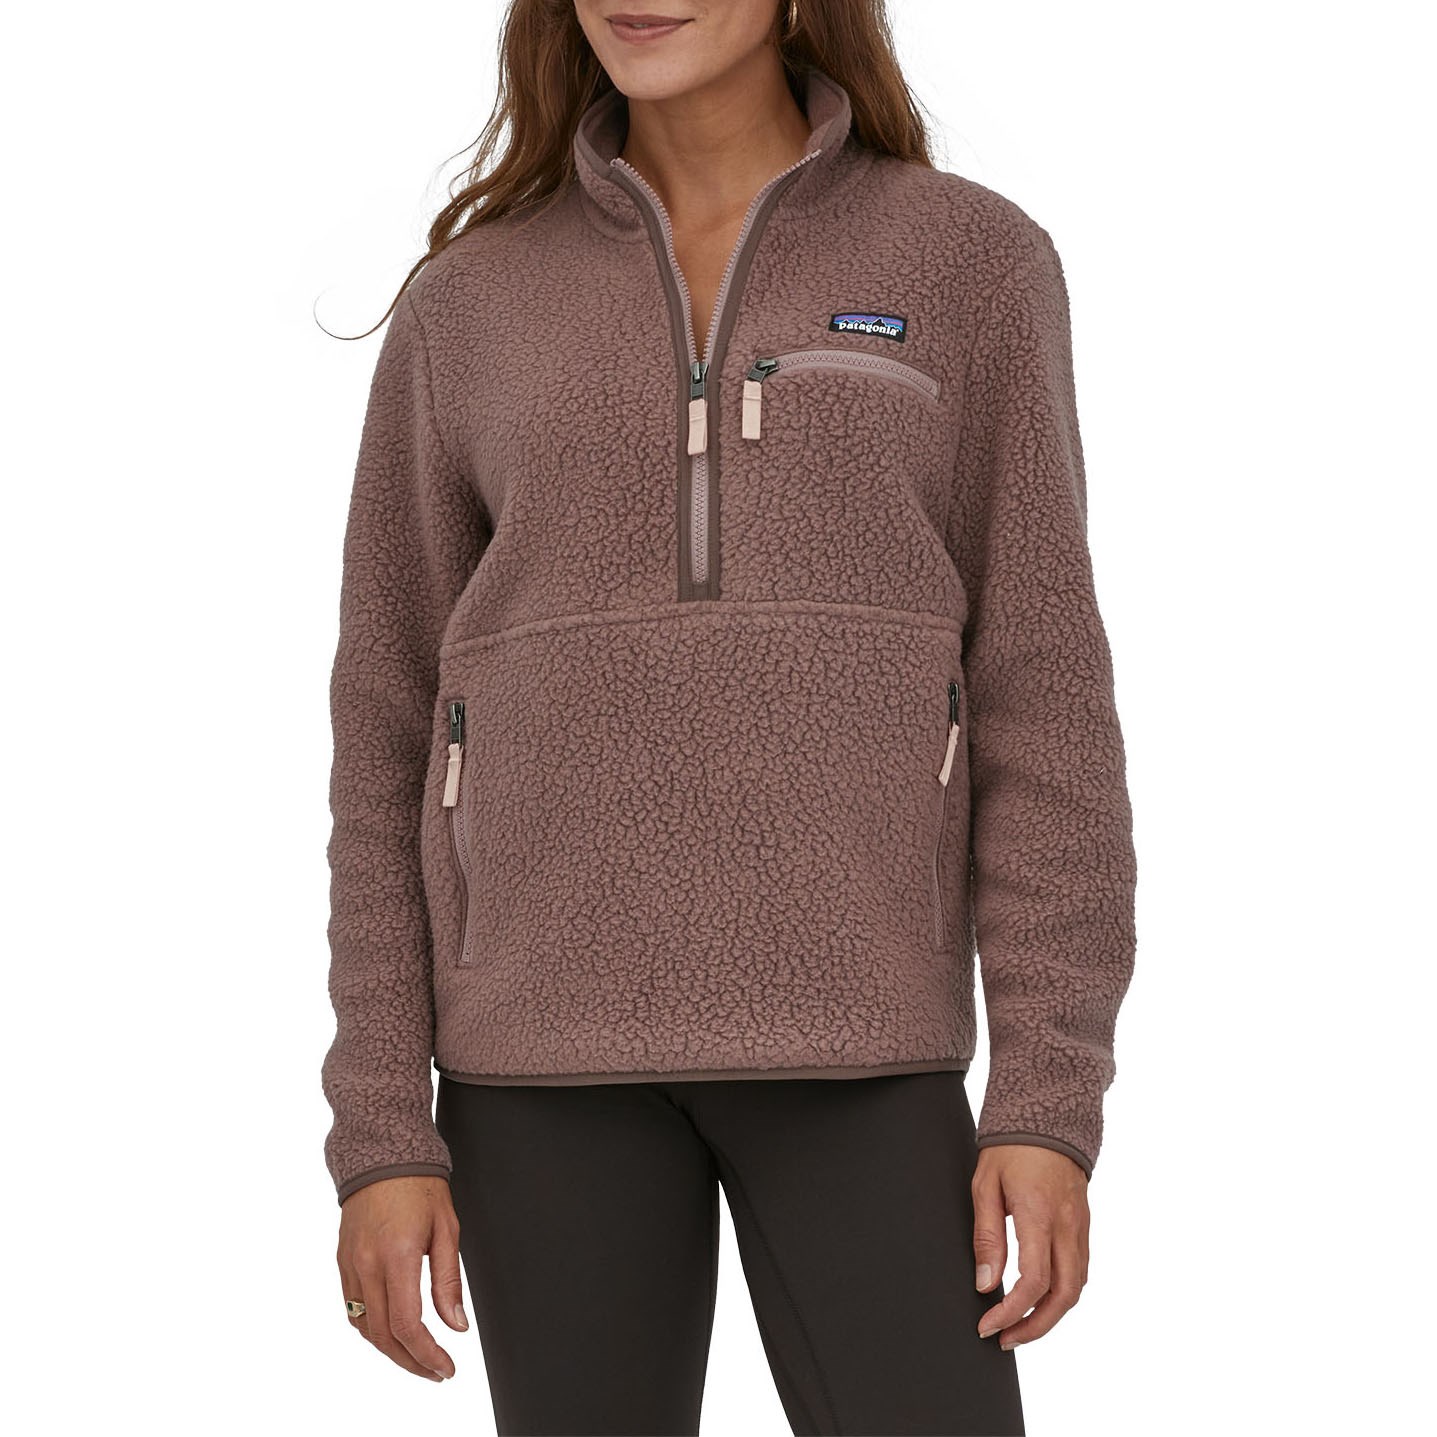 cancer groove Highland patagonia retro pile pullover womens Ready